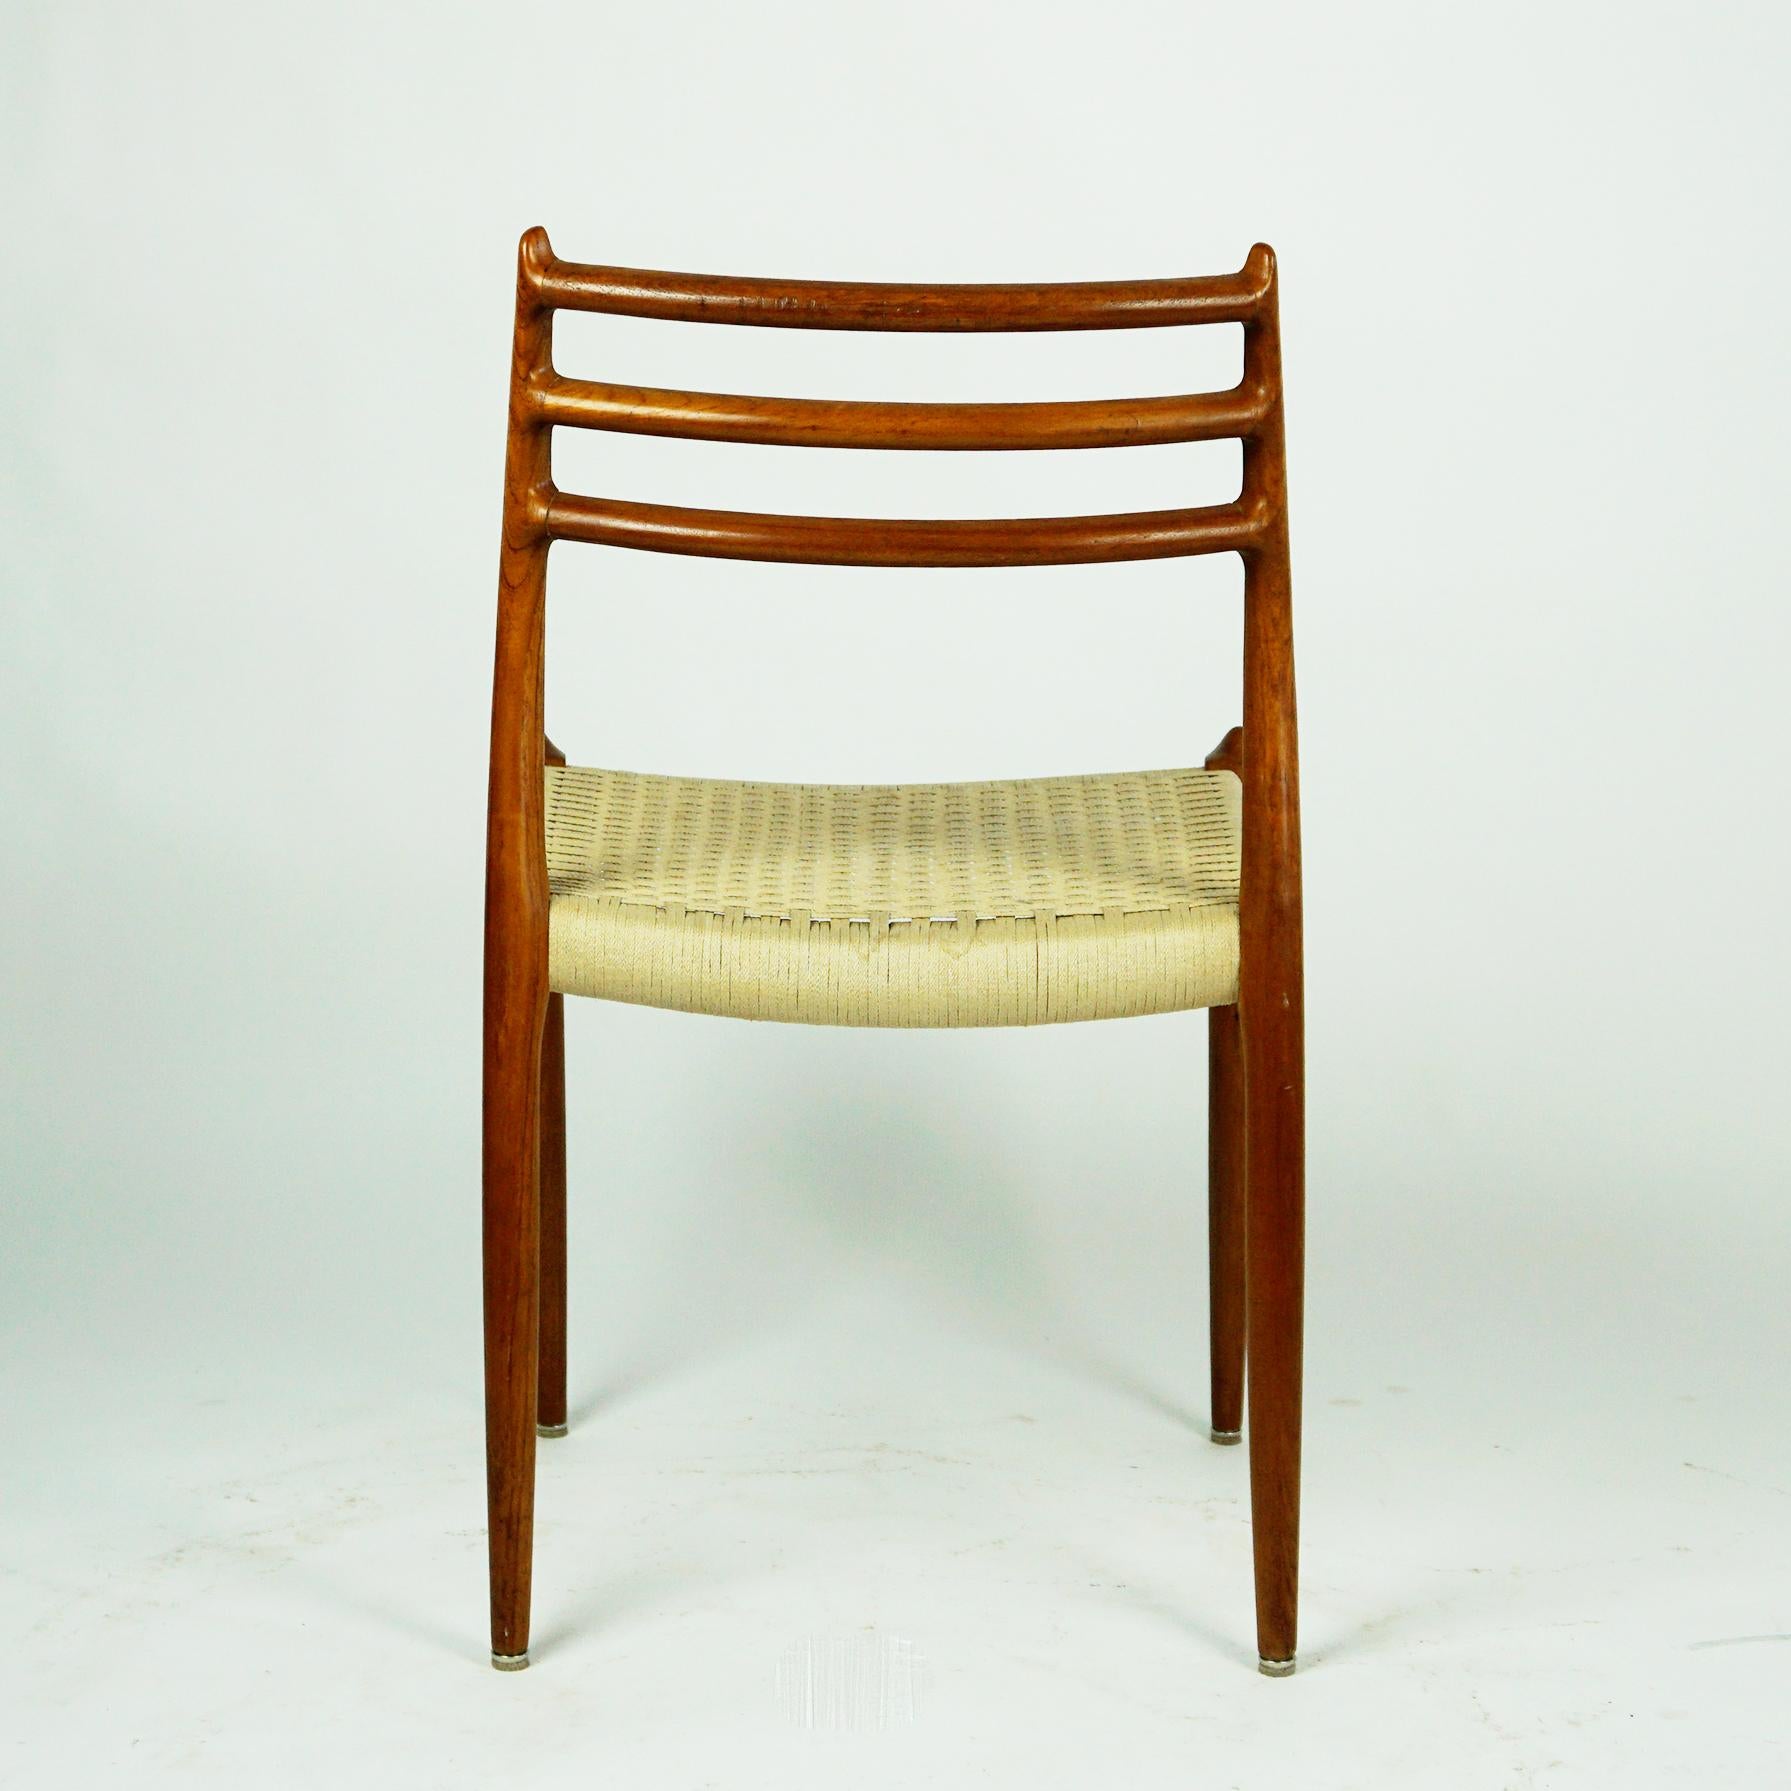 Mid-20th Century Pair of Danish Teak Dining Chairs Mod. 78 by Niels Otto Möller For Sale